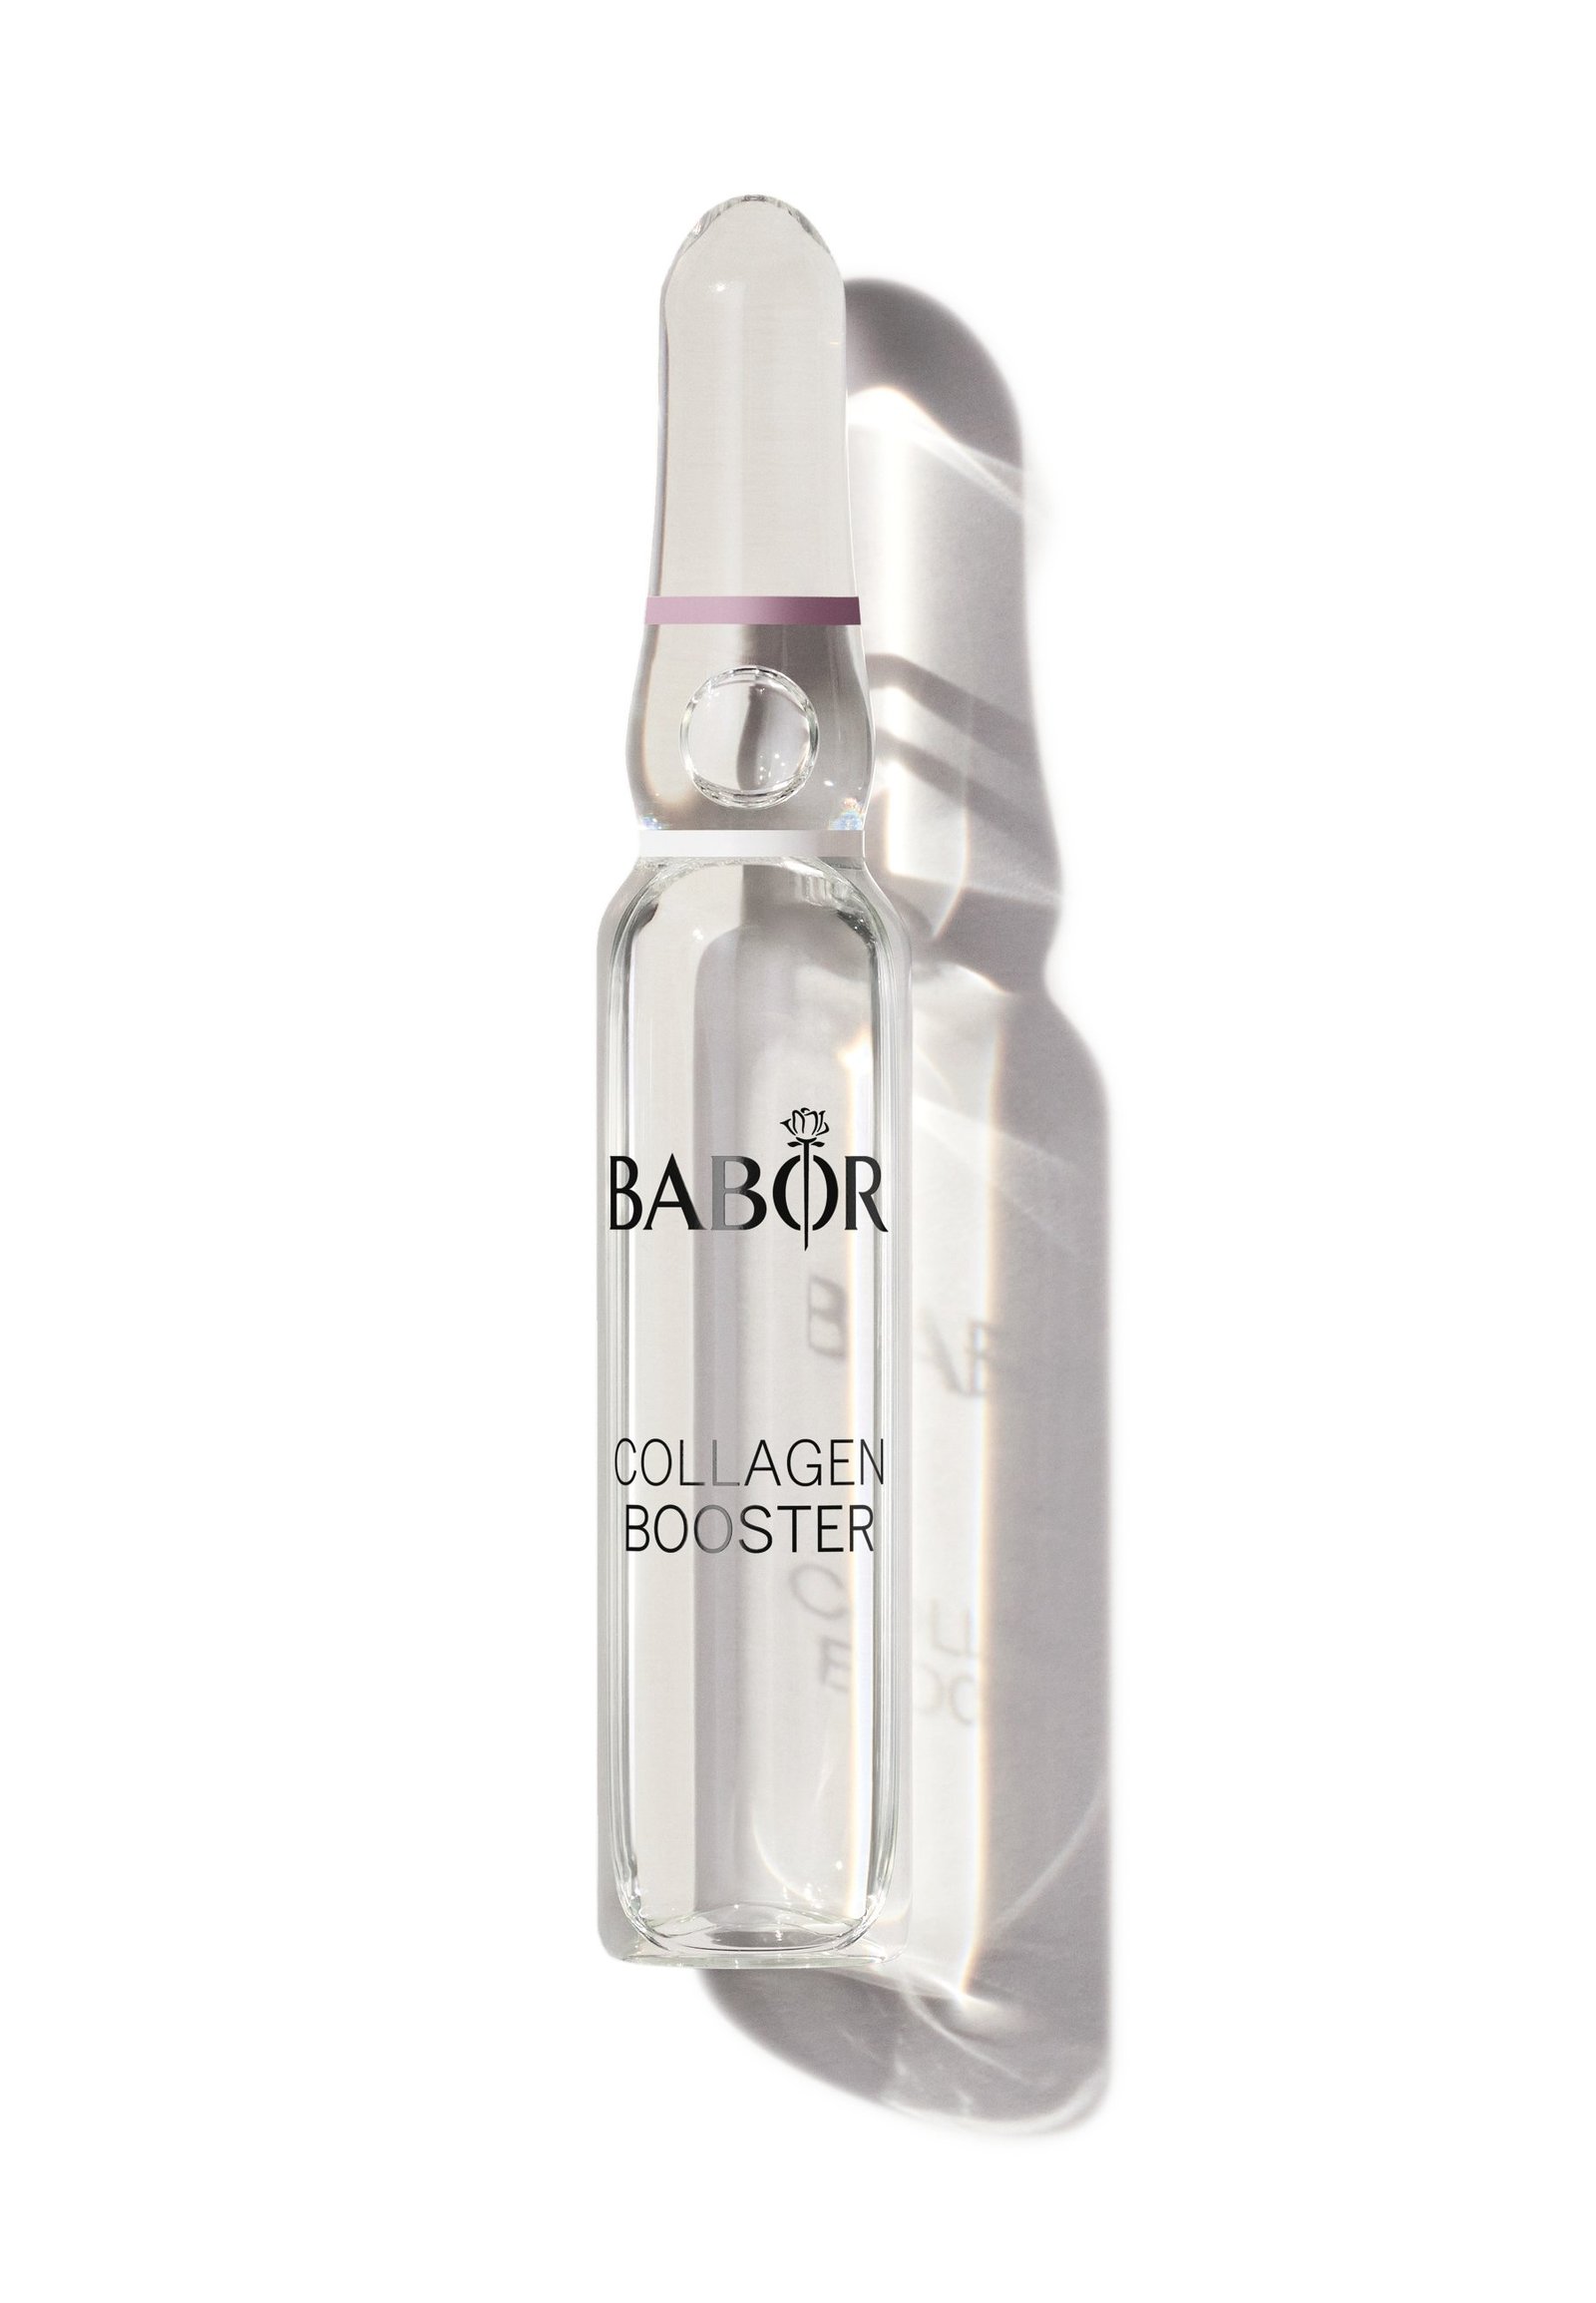 BABOR Ampoule Concentrates Collagen Booster 14ml (7*2ml)